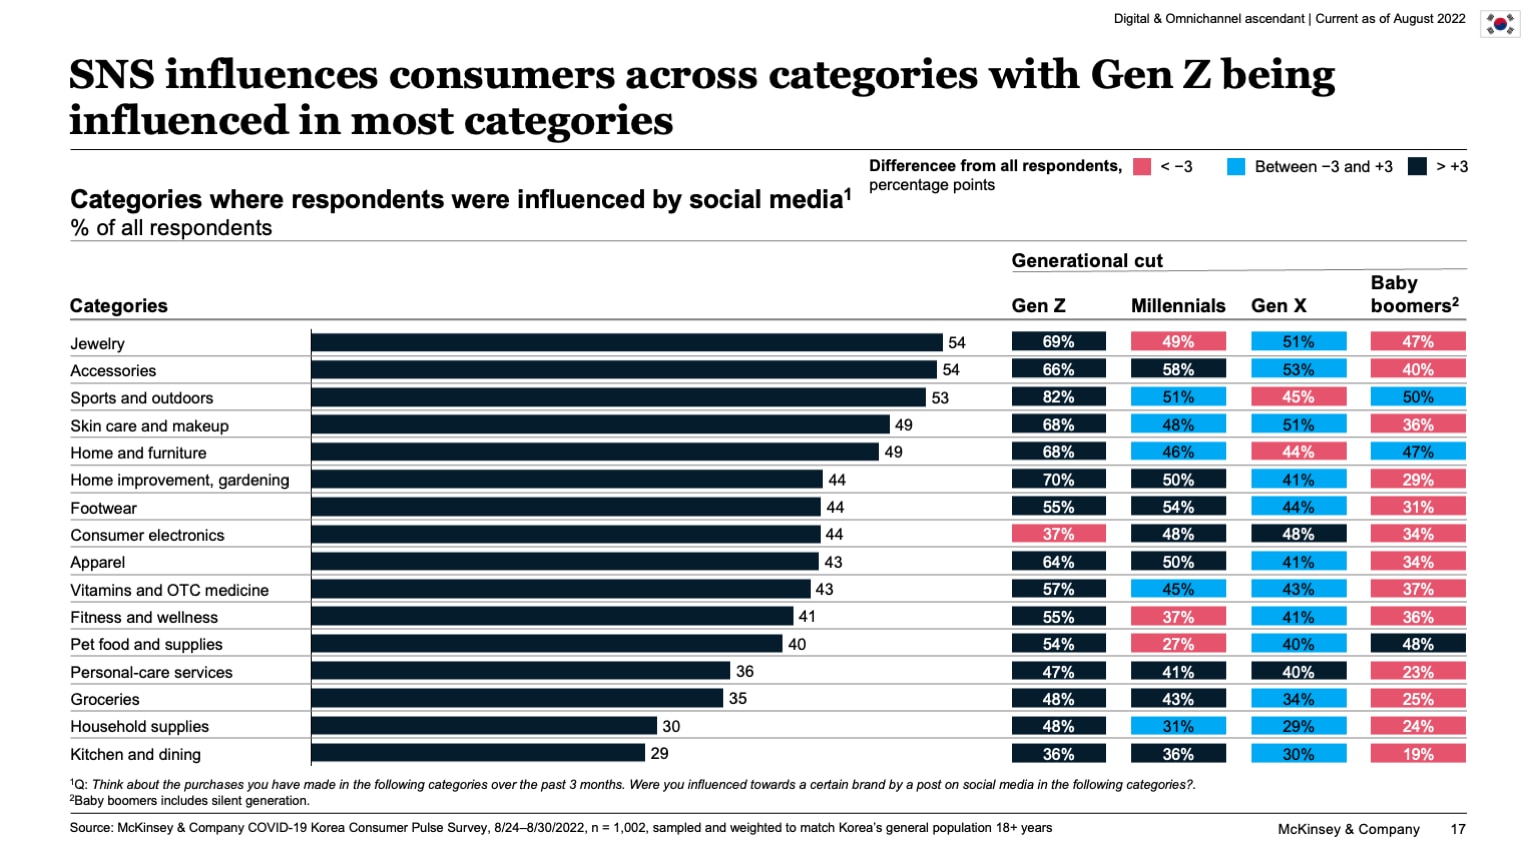 SNS influences consumers across categories with Gen Z being influenced in most categories